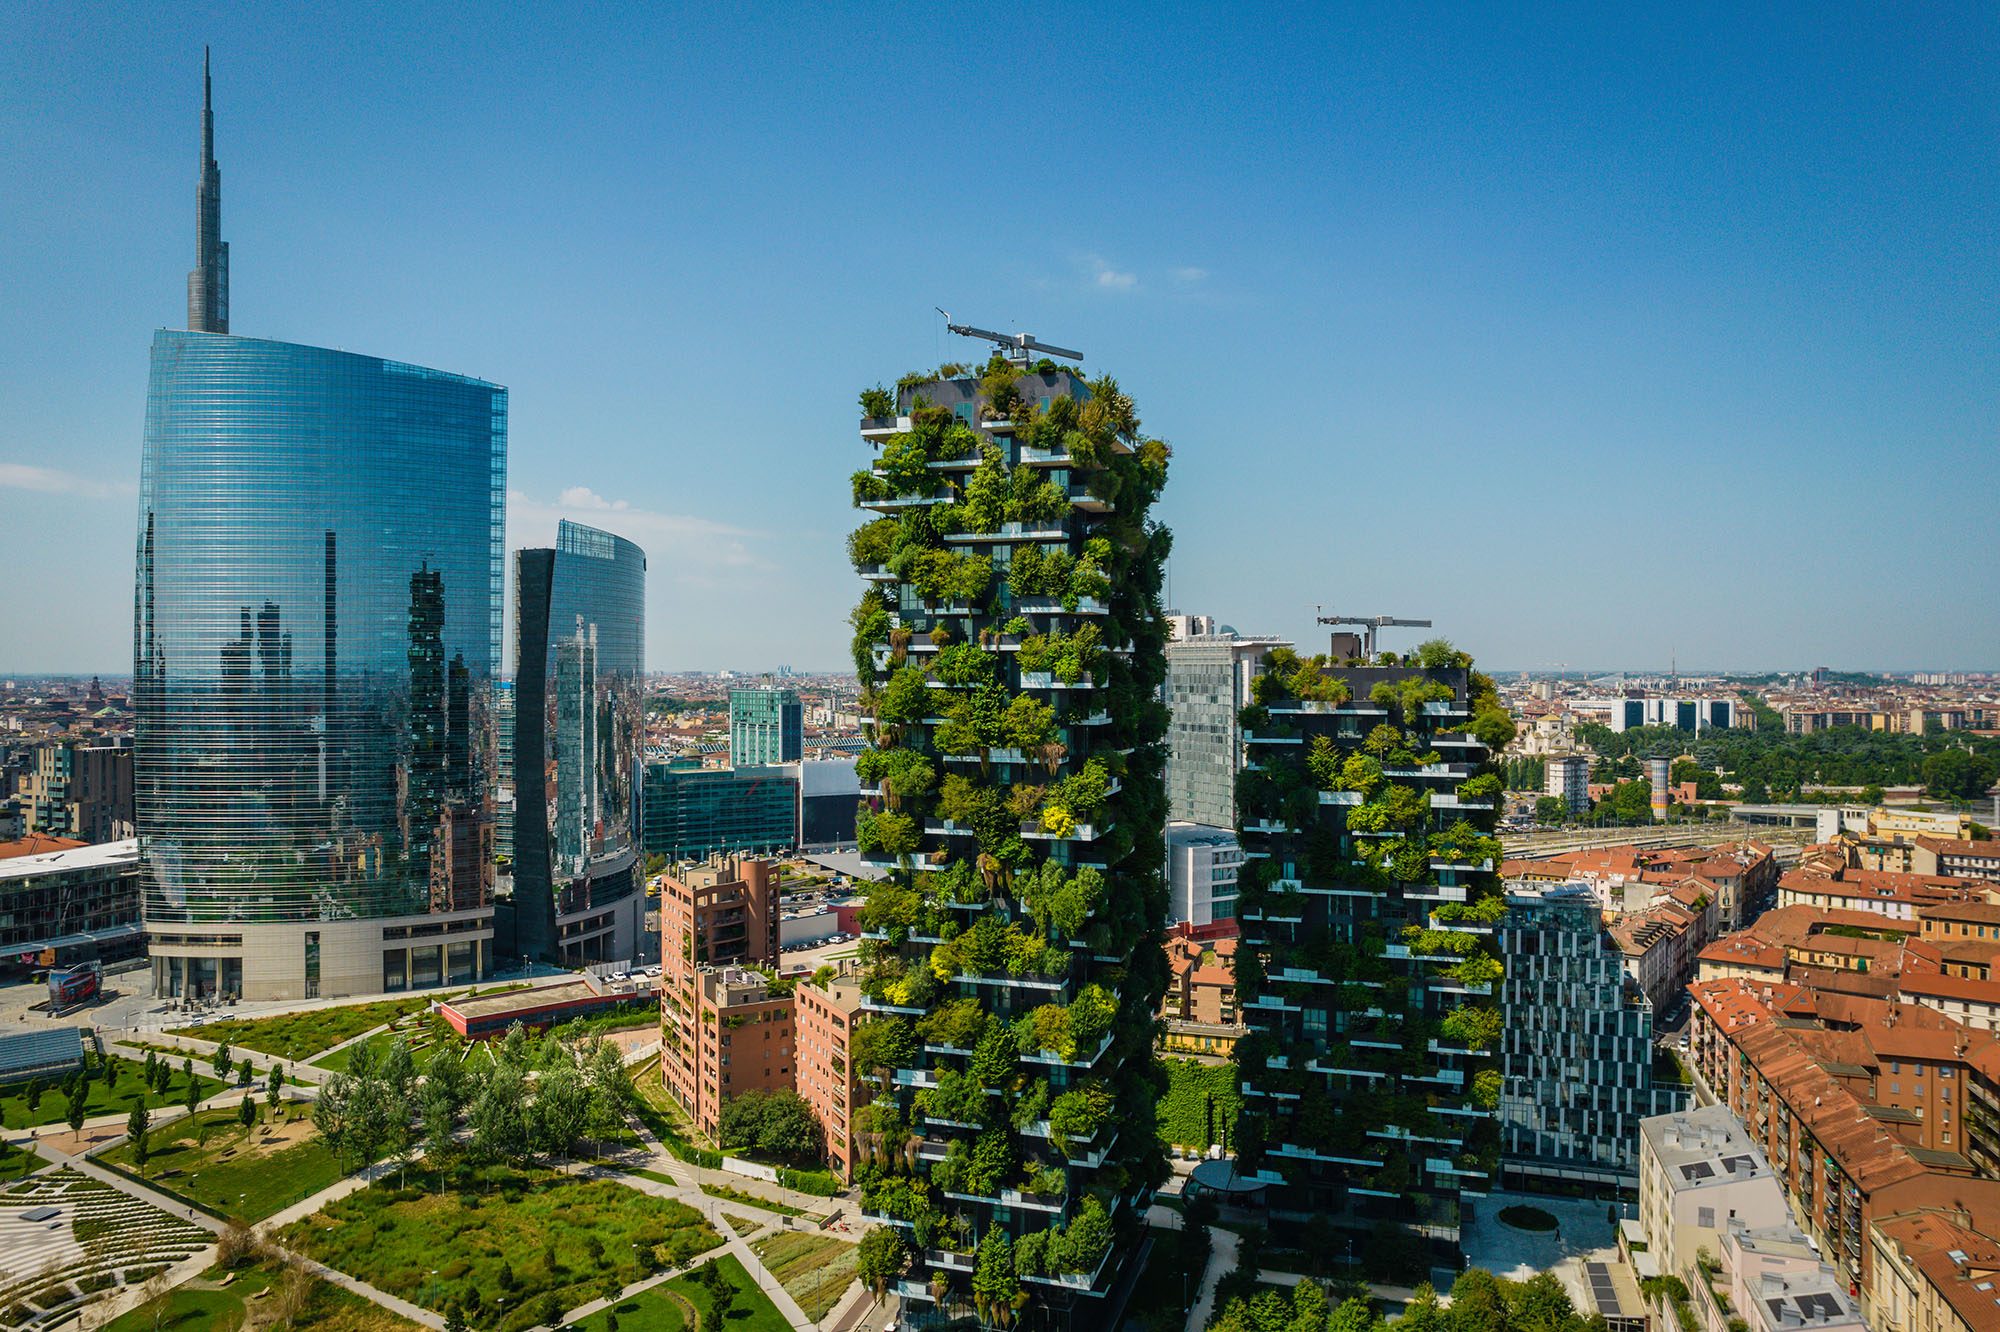 Milan skyline with two tower blocks adorned with plants in foreground